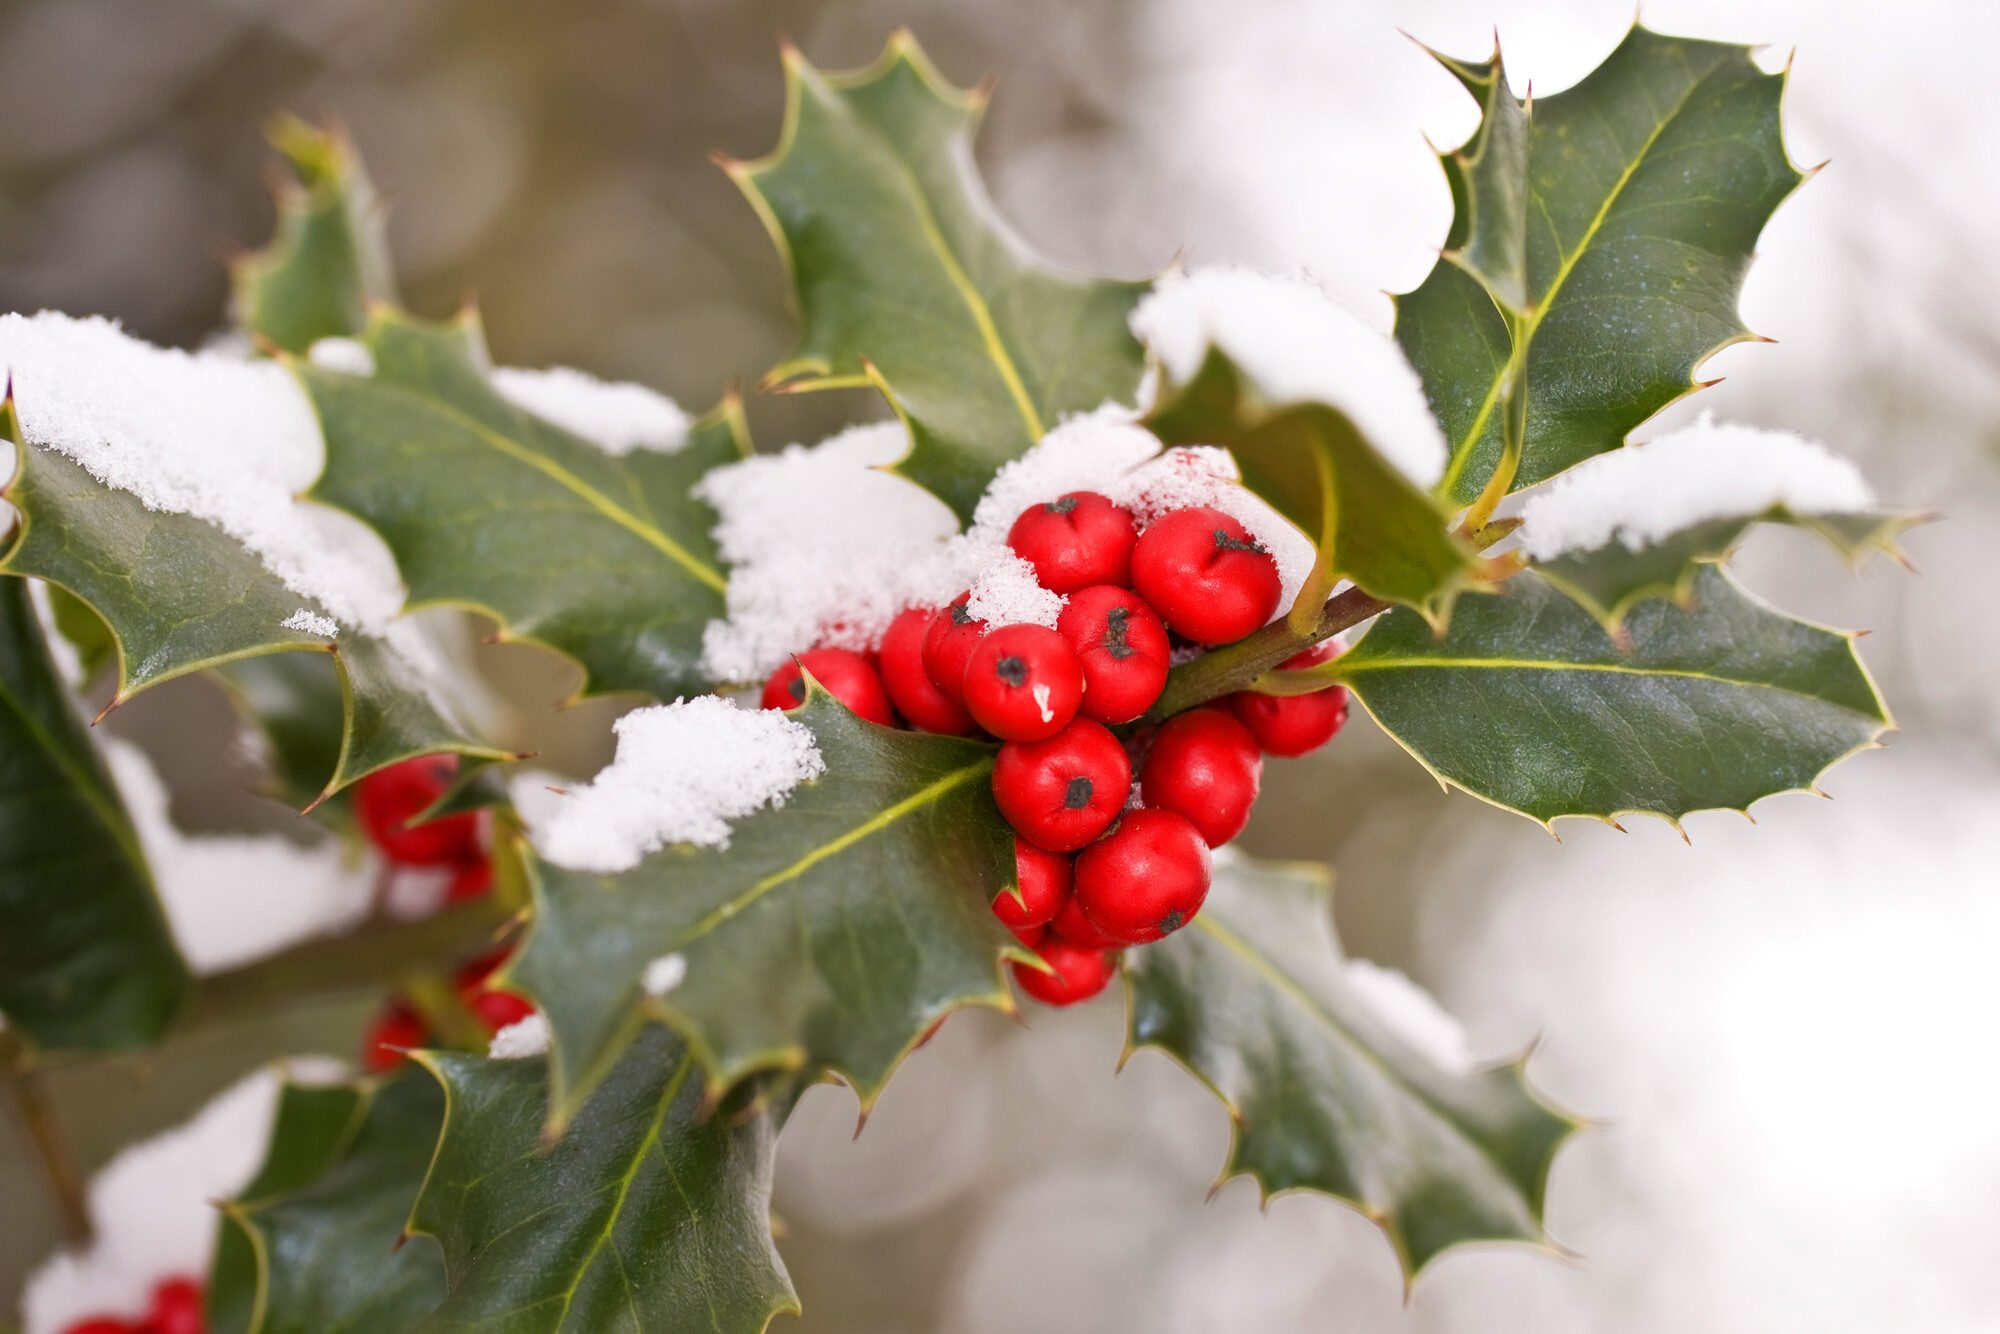 Snow covered, red holly berries and green leaves.